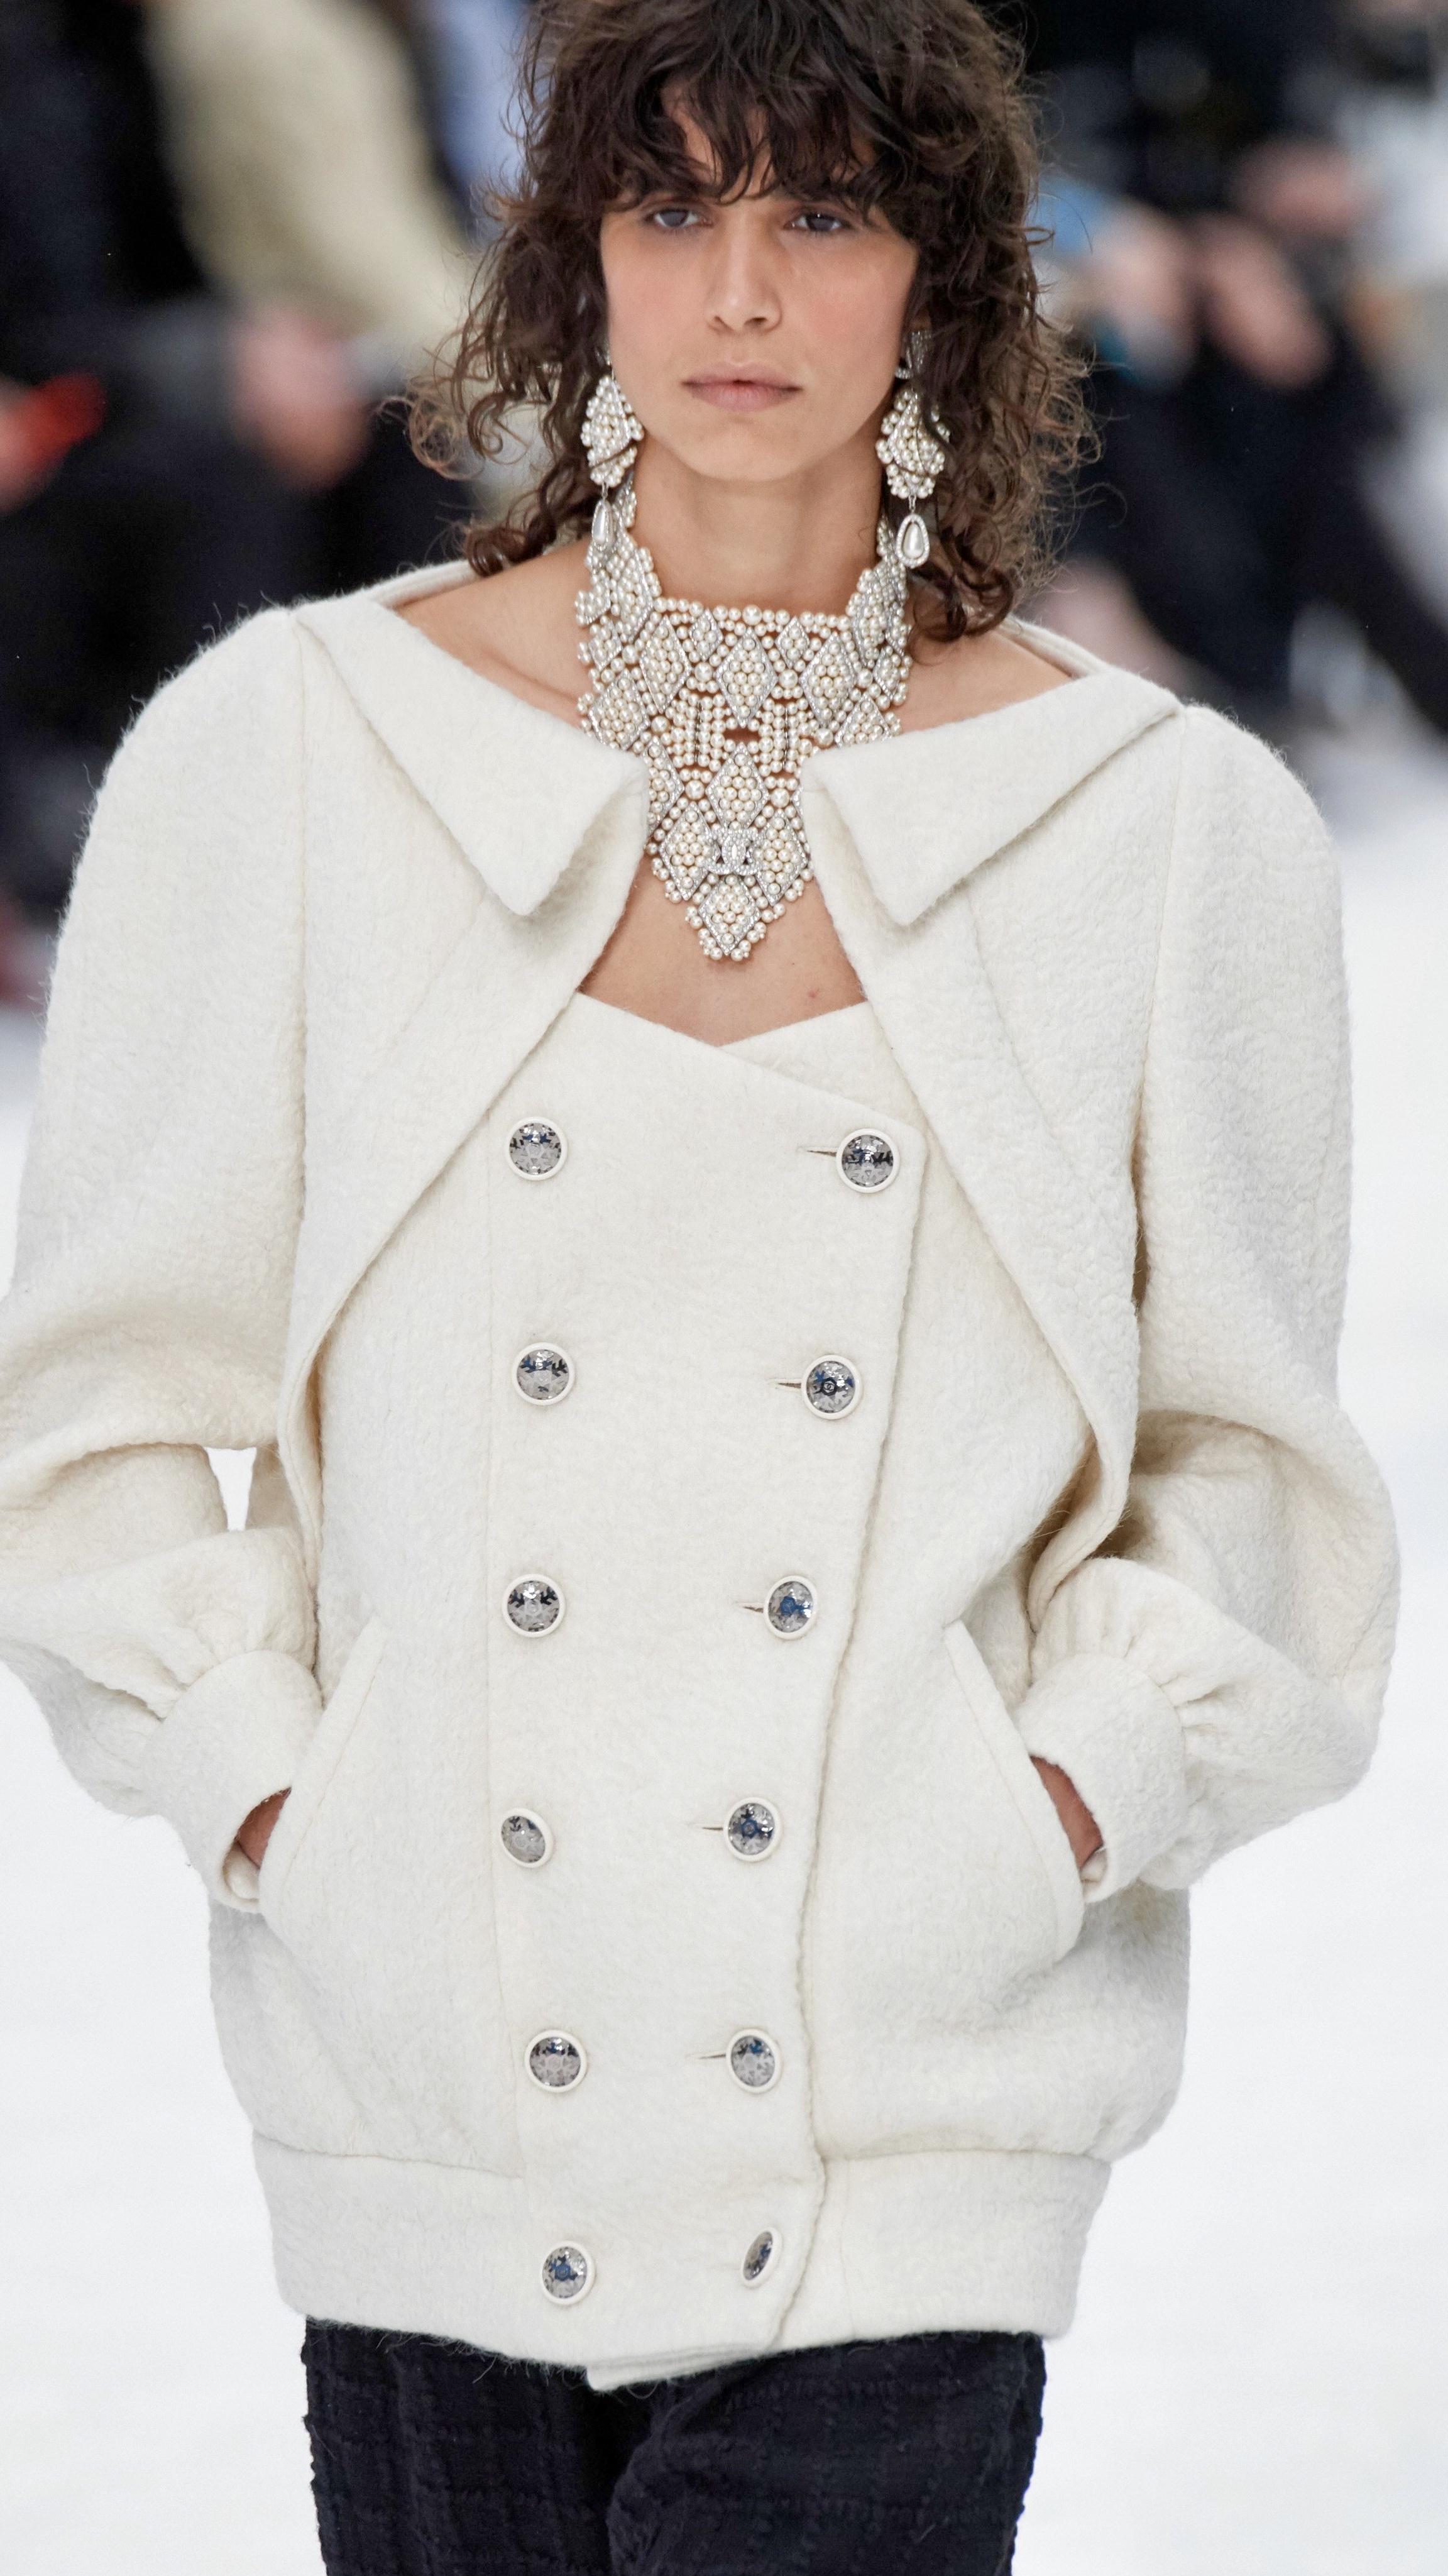 75 Best CHANEL Fall 2019 #Chanel #Fall2019 - IN FASHION daily